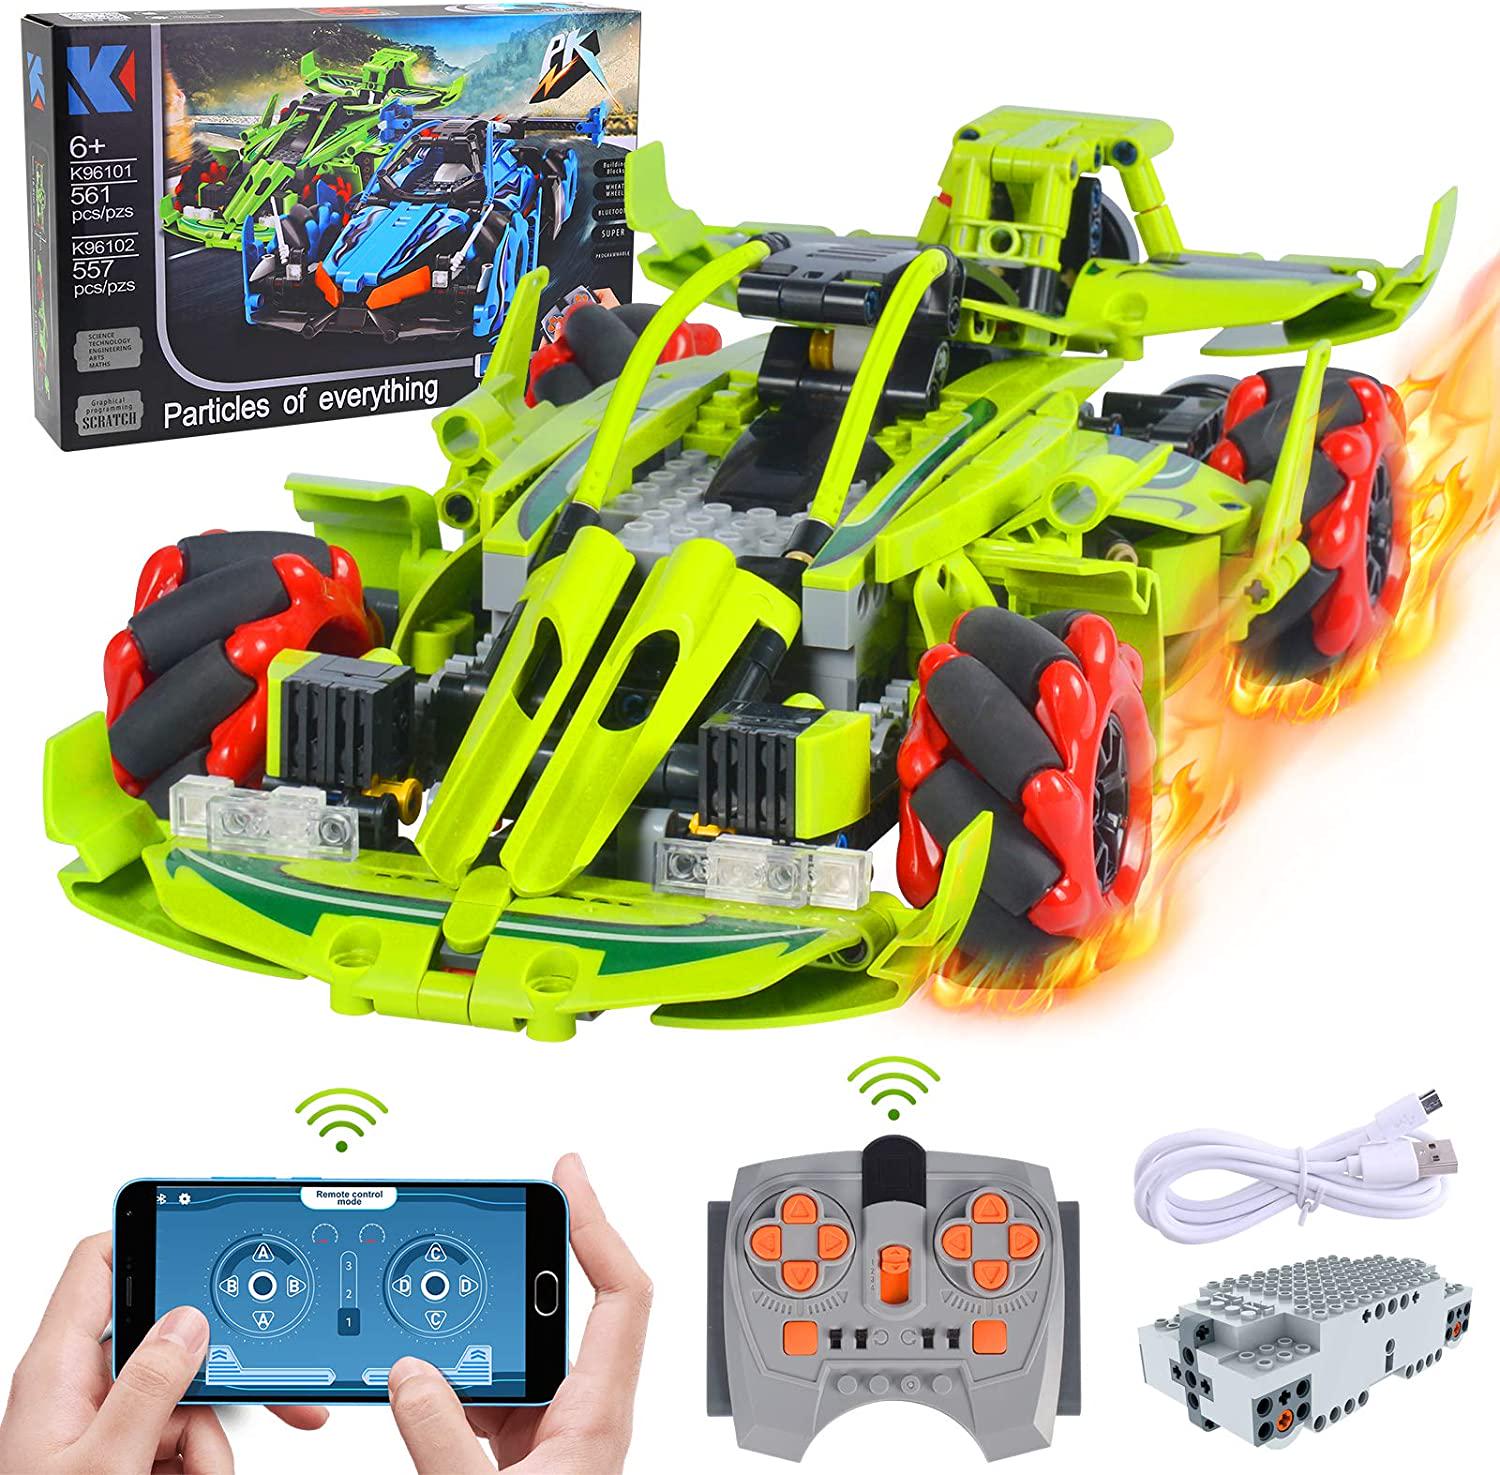 GRESAHOM, GRESAHOM Remote Control Building Kit,Programmable Engineering Learning Building Set 561PCS,360°Rotating Racing Car with 2.4Ghz App Controlled Stunt 4x4 Car for Kids 6+Year Old